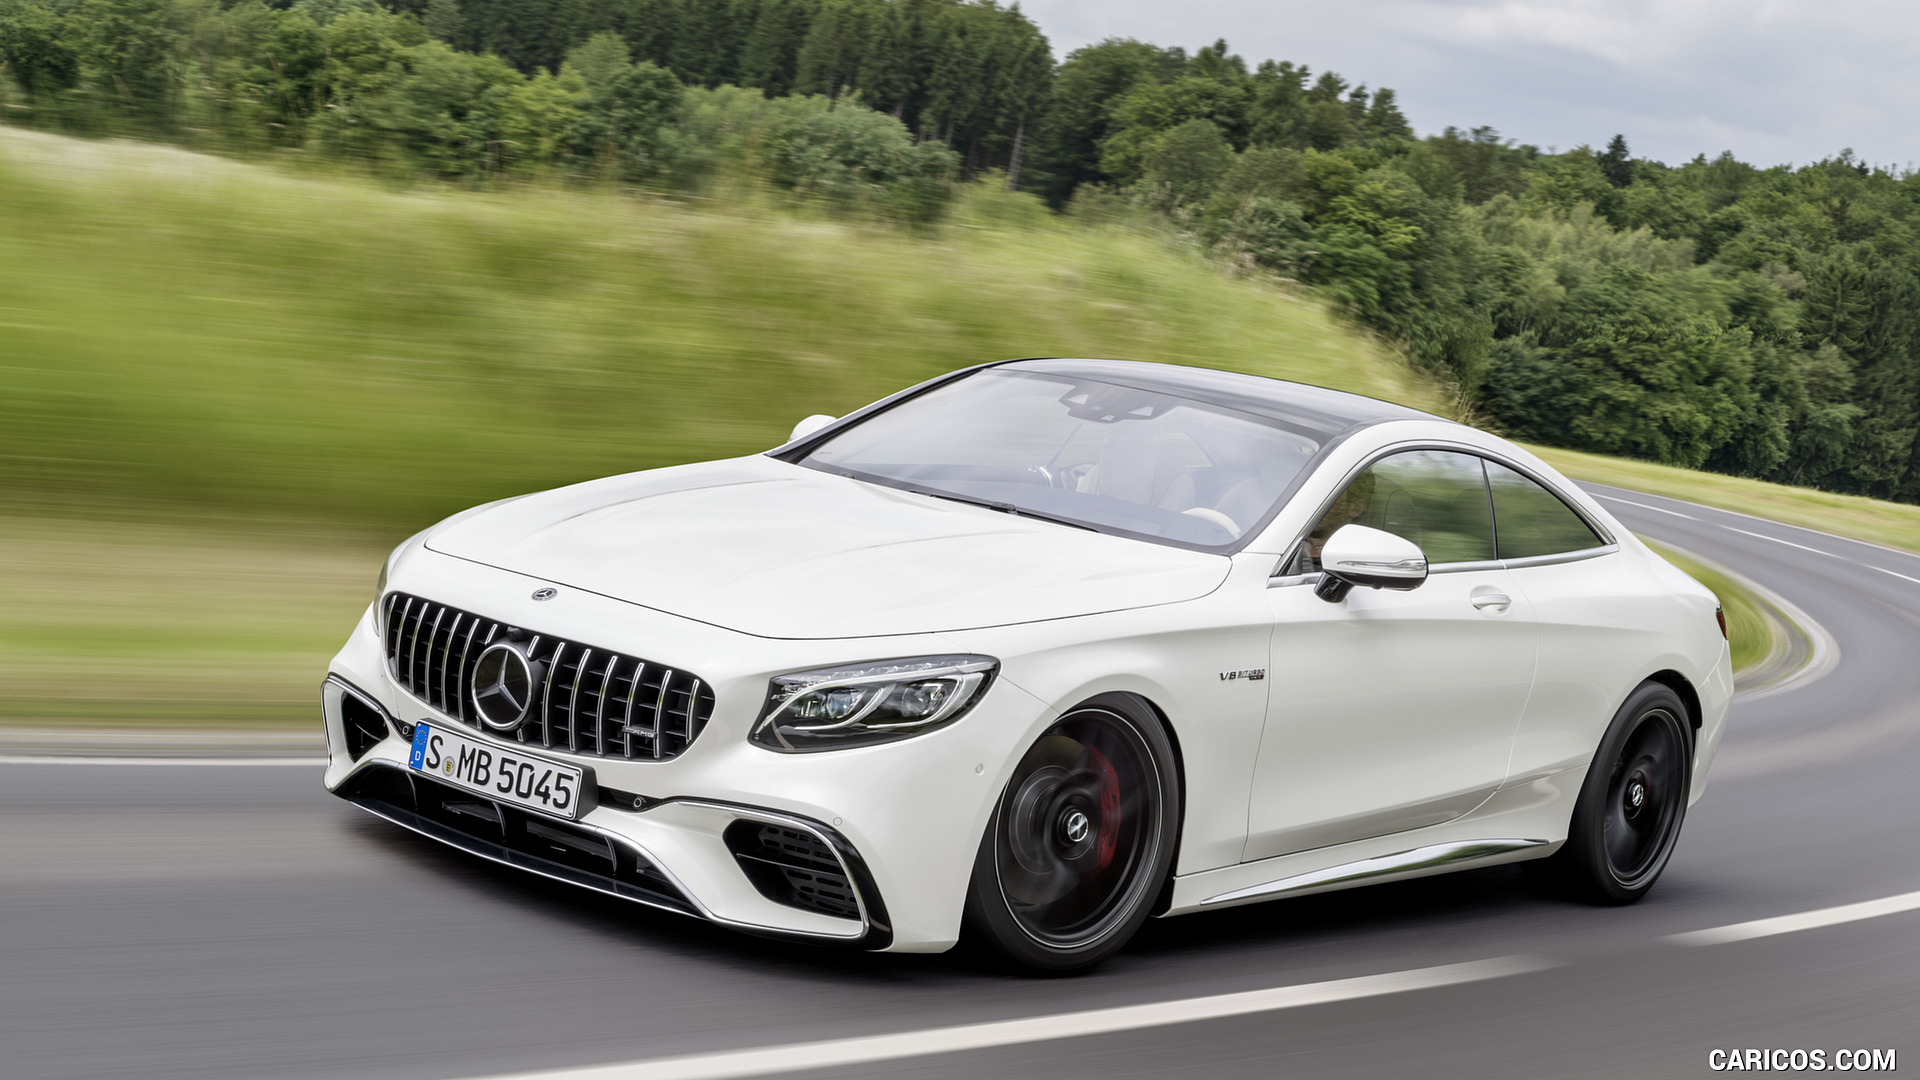 2018 Mercedes-AMG S63 Coupe and Cabriolet